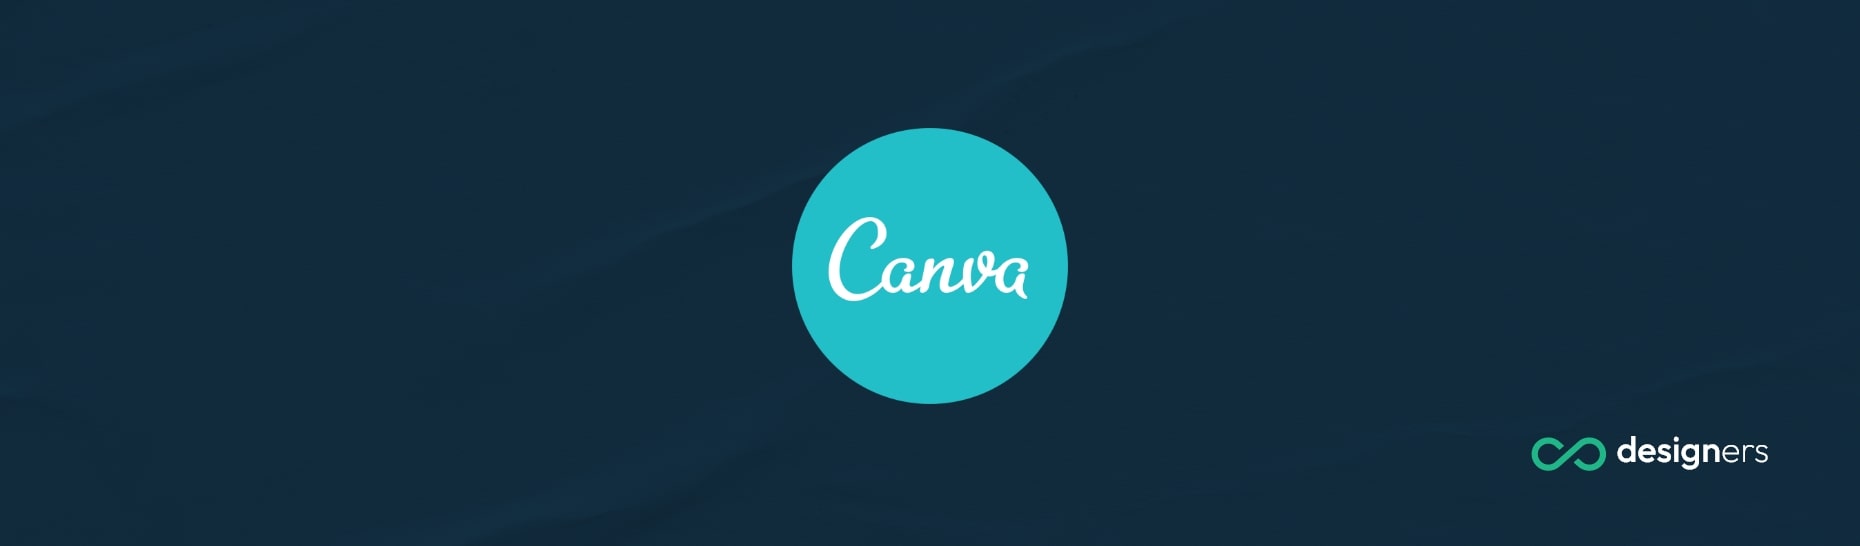 Is Canva Printing Good Quality? 